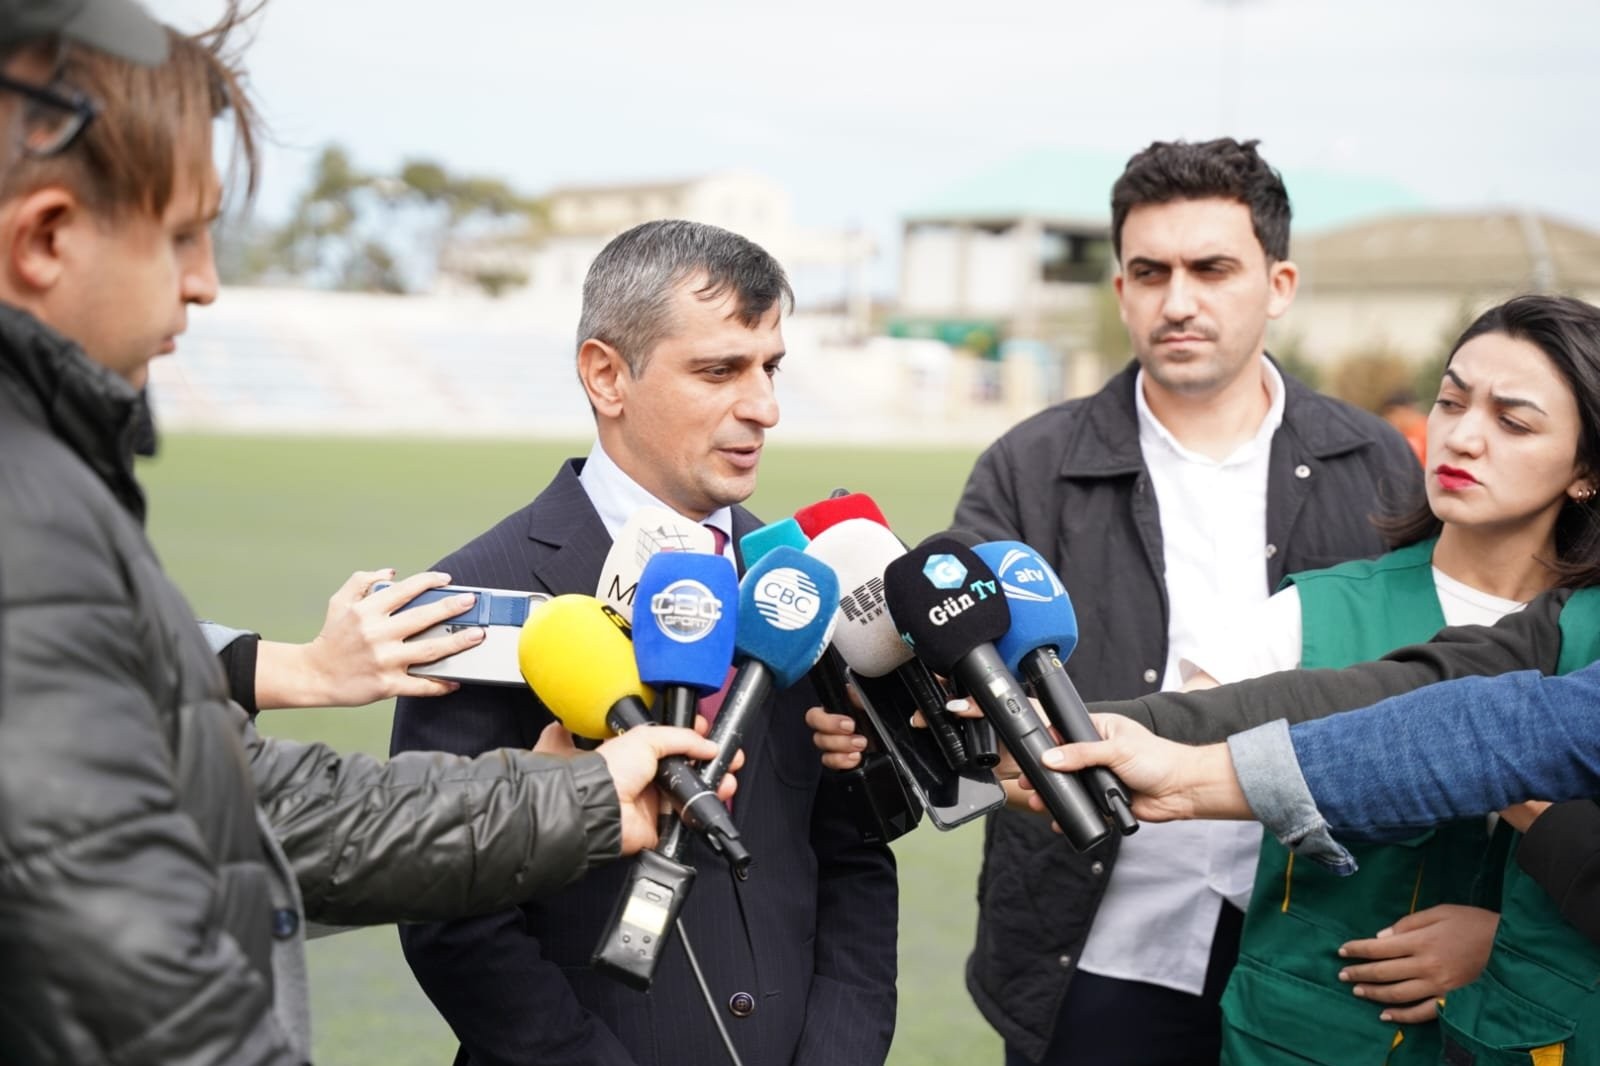 Director of "Ulduz": "We want to create our team that will participate in advanced football in the future"